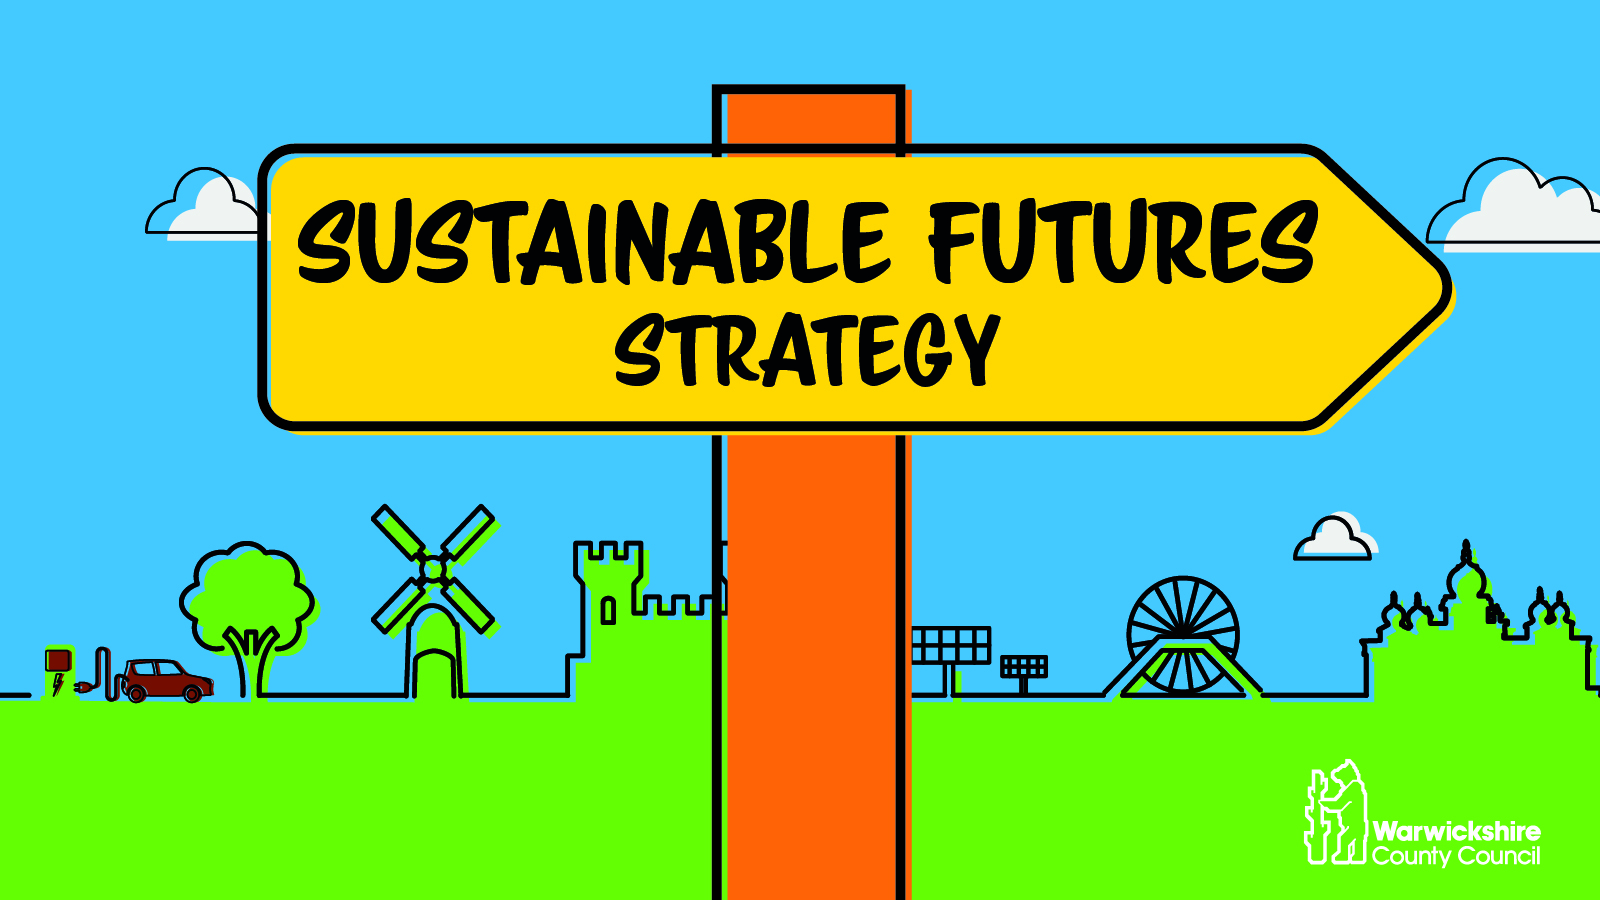 The WCC Sustainable Futures Strategy 2022